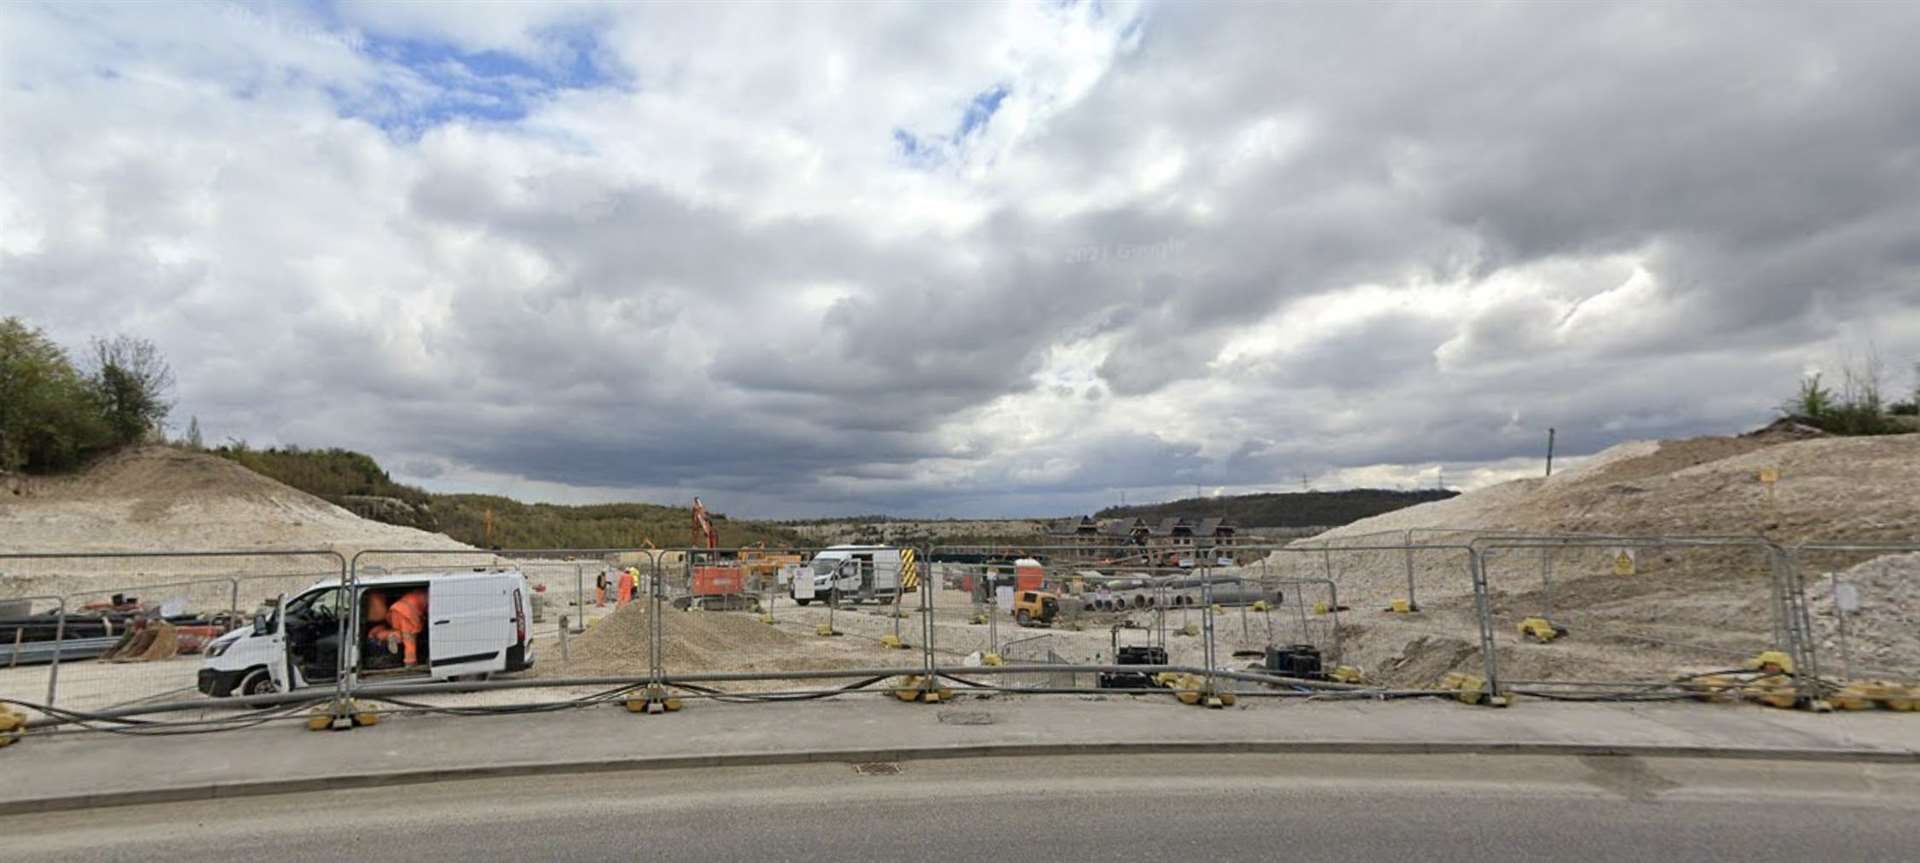 The sign was spotted at this development in Ebbsfleet. Picture: Google Maps